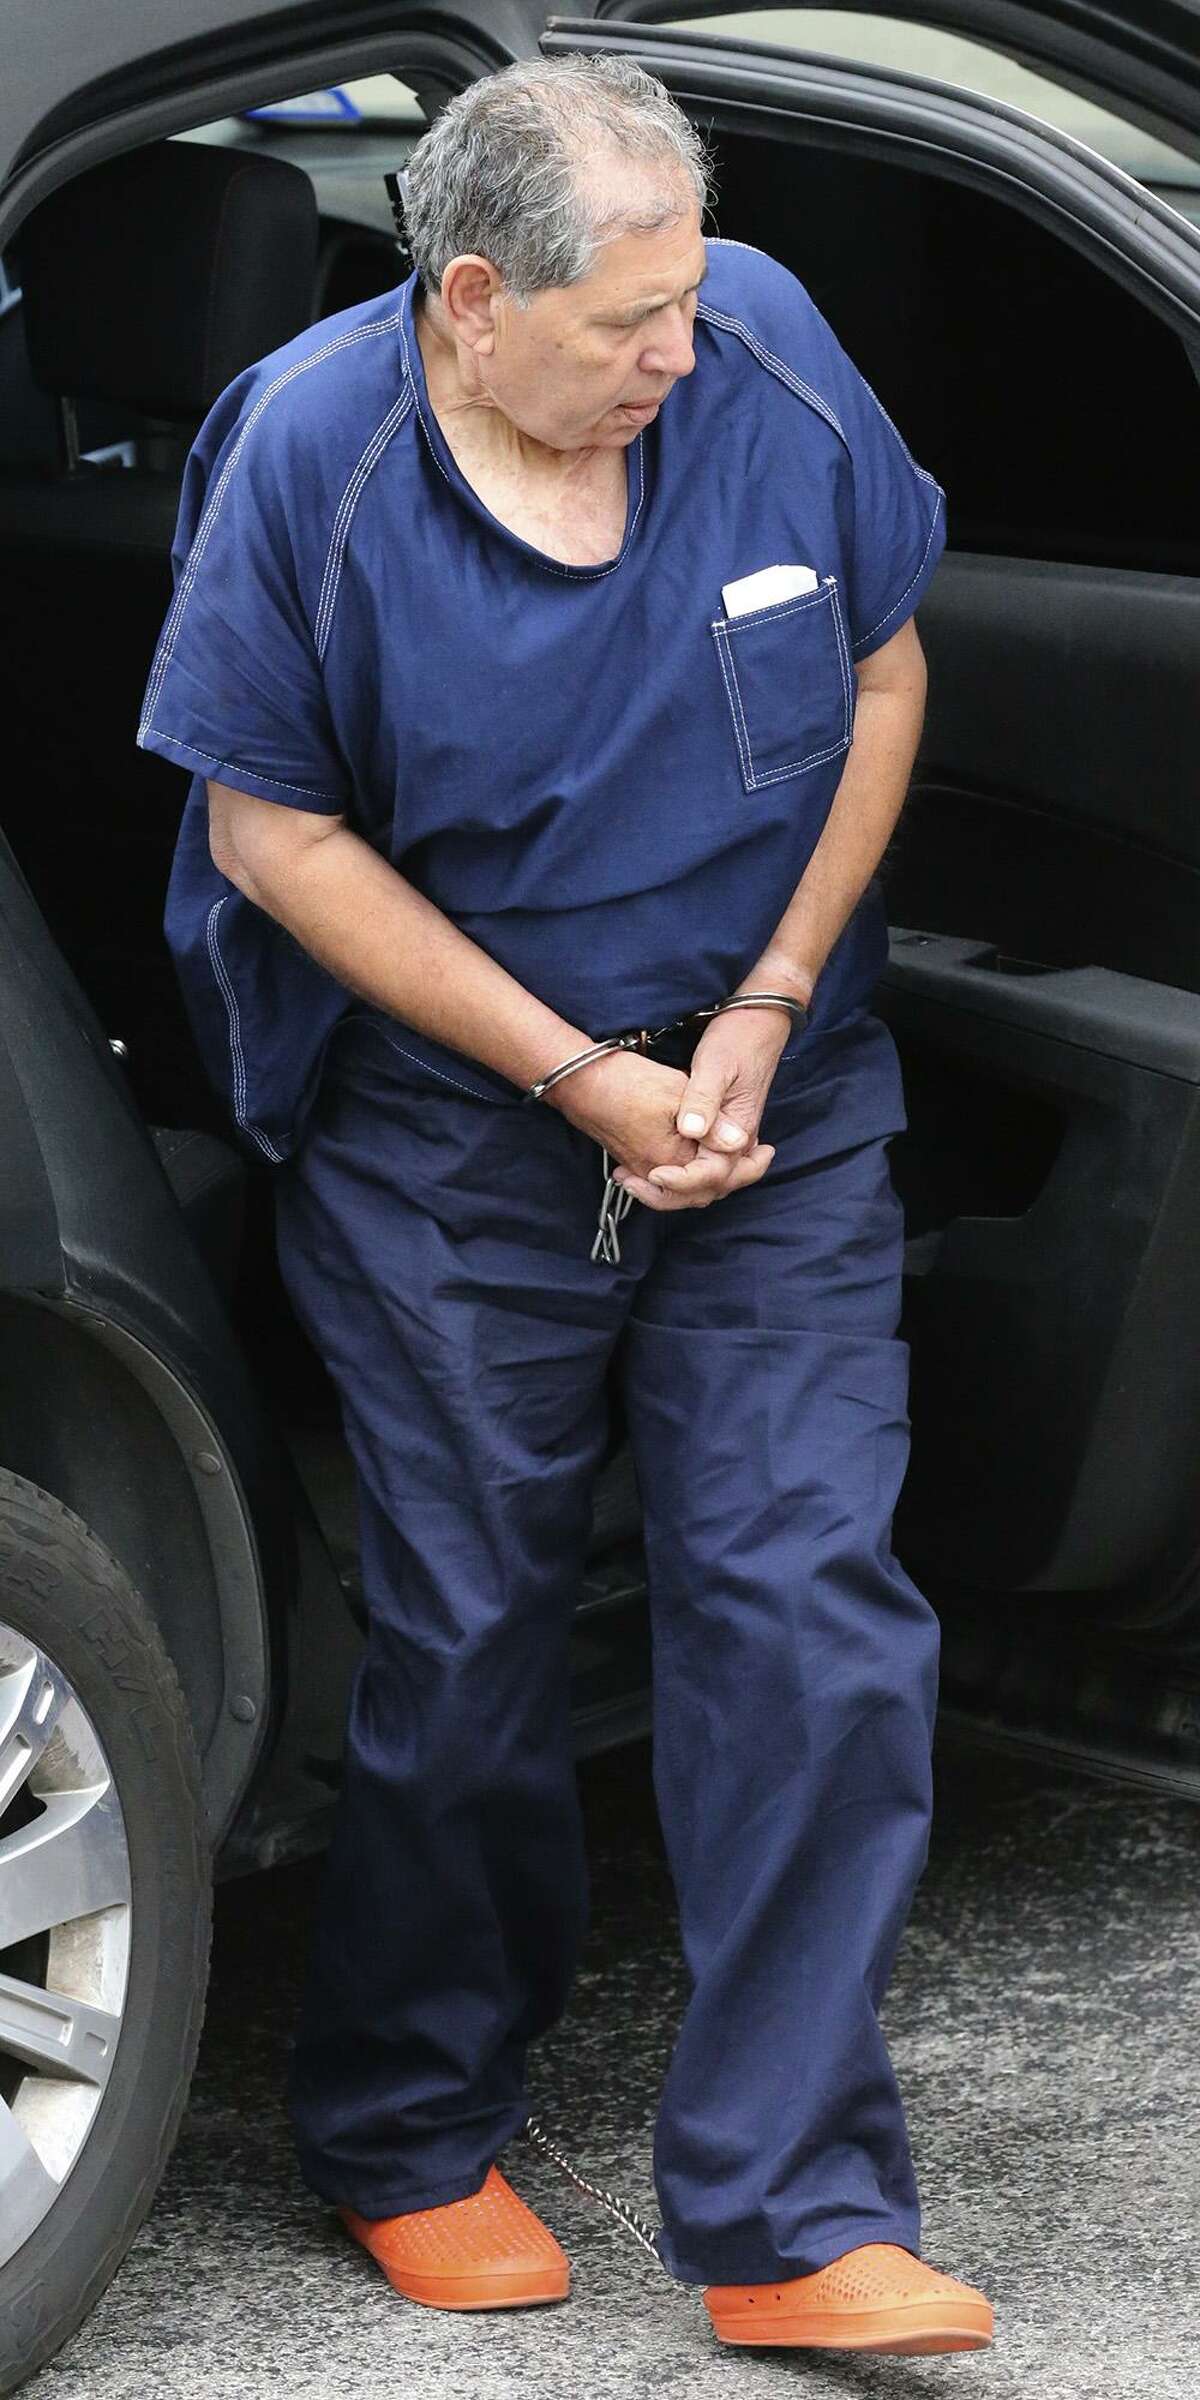 Roberto Martinez Gill exits a vehicle Friday February 3, 2017 at the rear of the John H. Wood, Jr. Federal Courthouse. Martinez-Gill, of San Antonio, was sent to prison for life in 1992 after a jury convicted him of possessing heroin and cocaine with intent to distribute. He sought repeatedly over the years to have his sentence overturned.